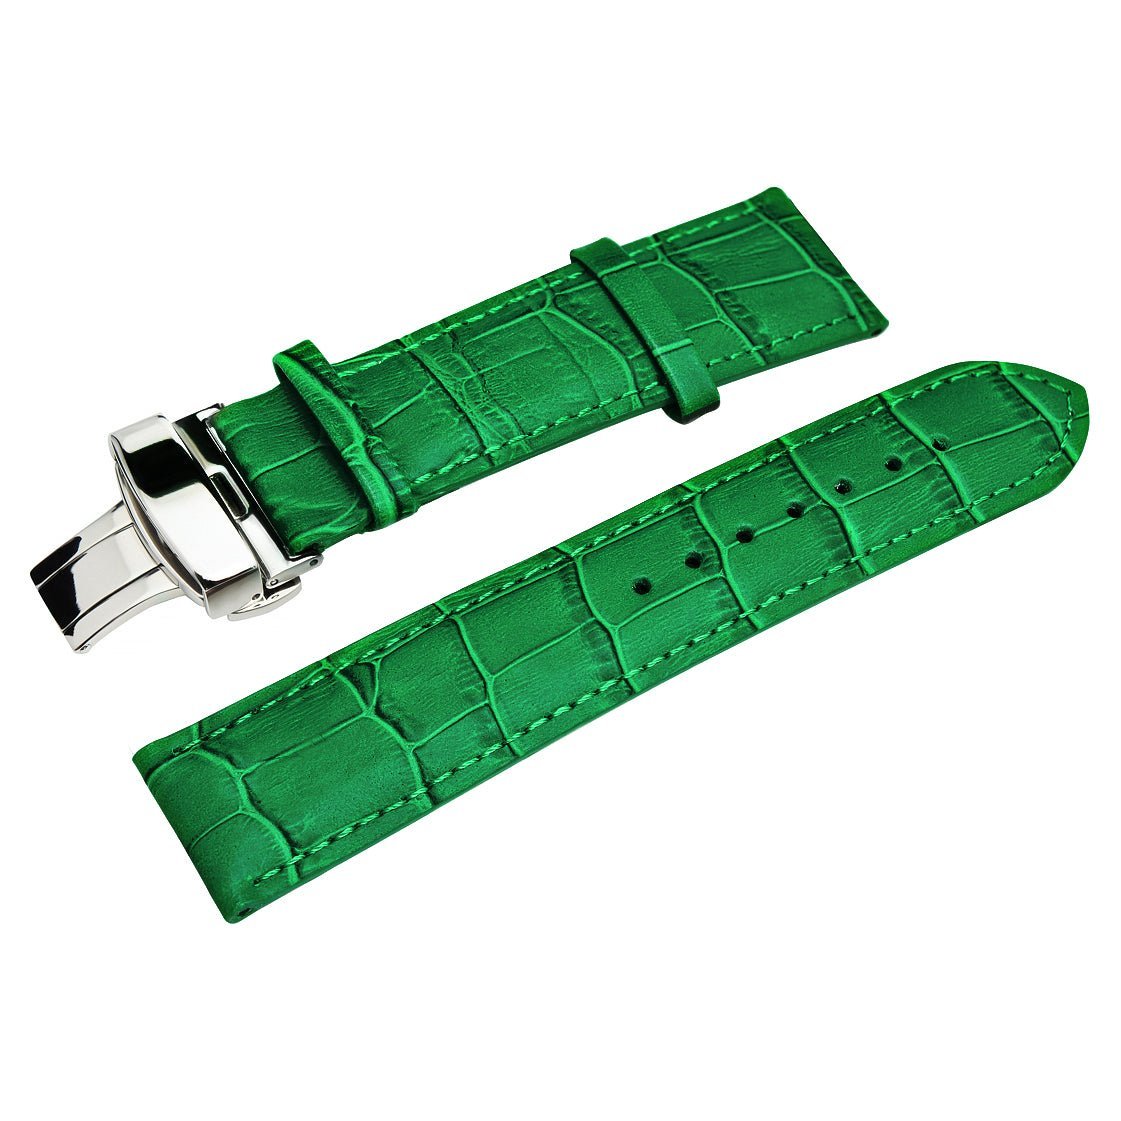 HERITAGE I watch strap, genuine cowhide, green alligator pattern. Elevate your SÖNER watch, polished steel clasp.